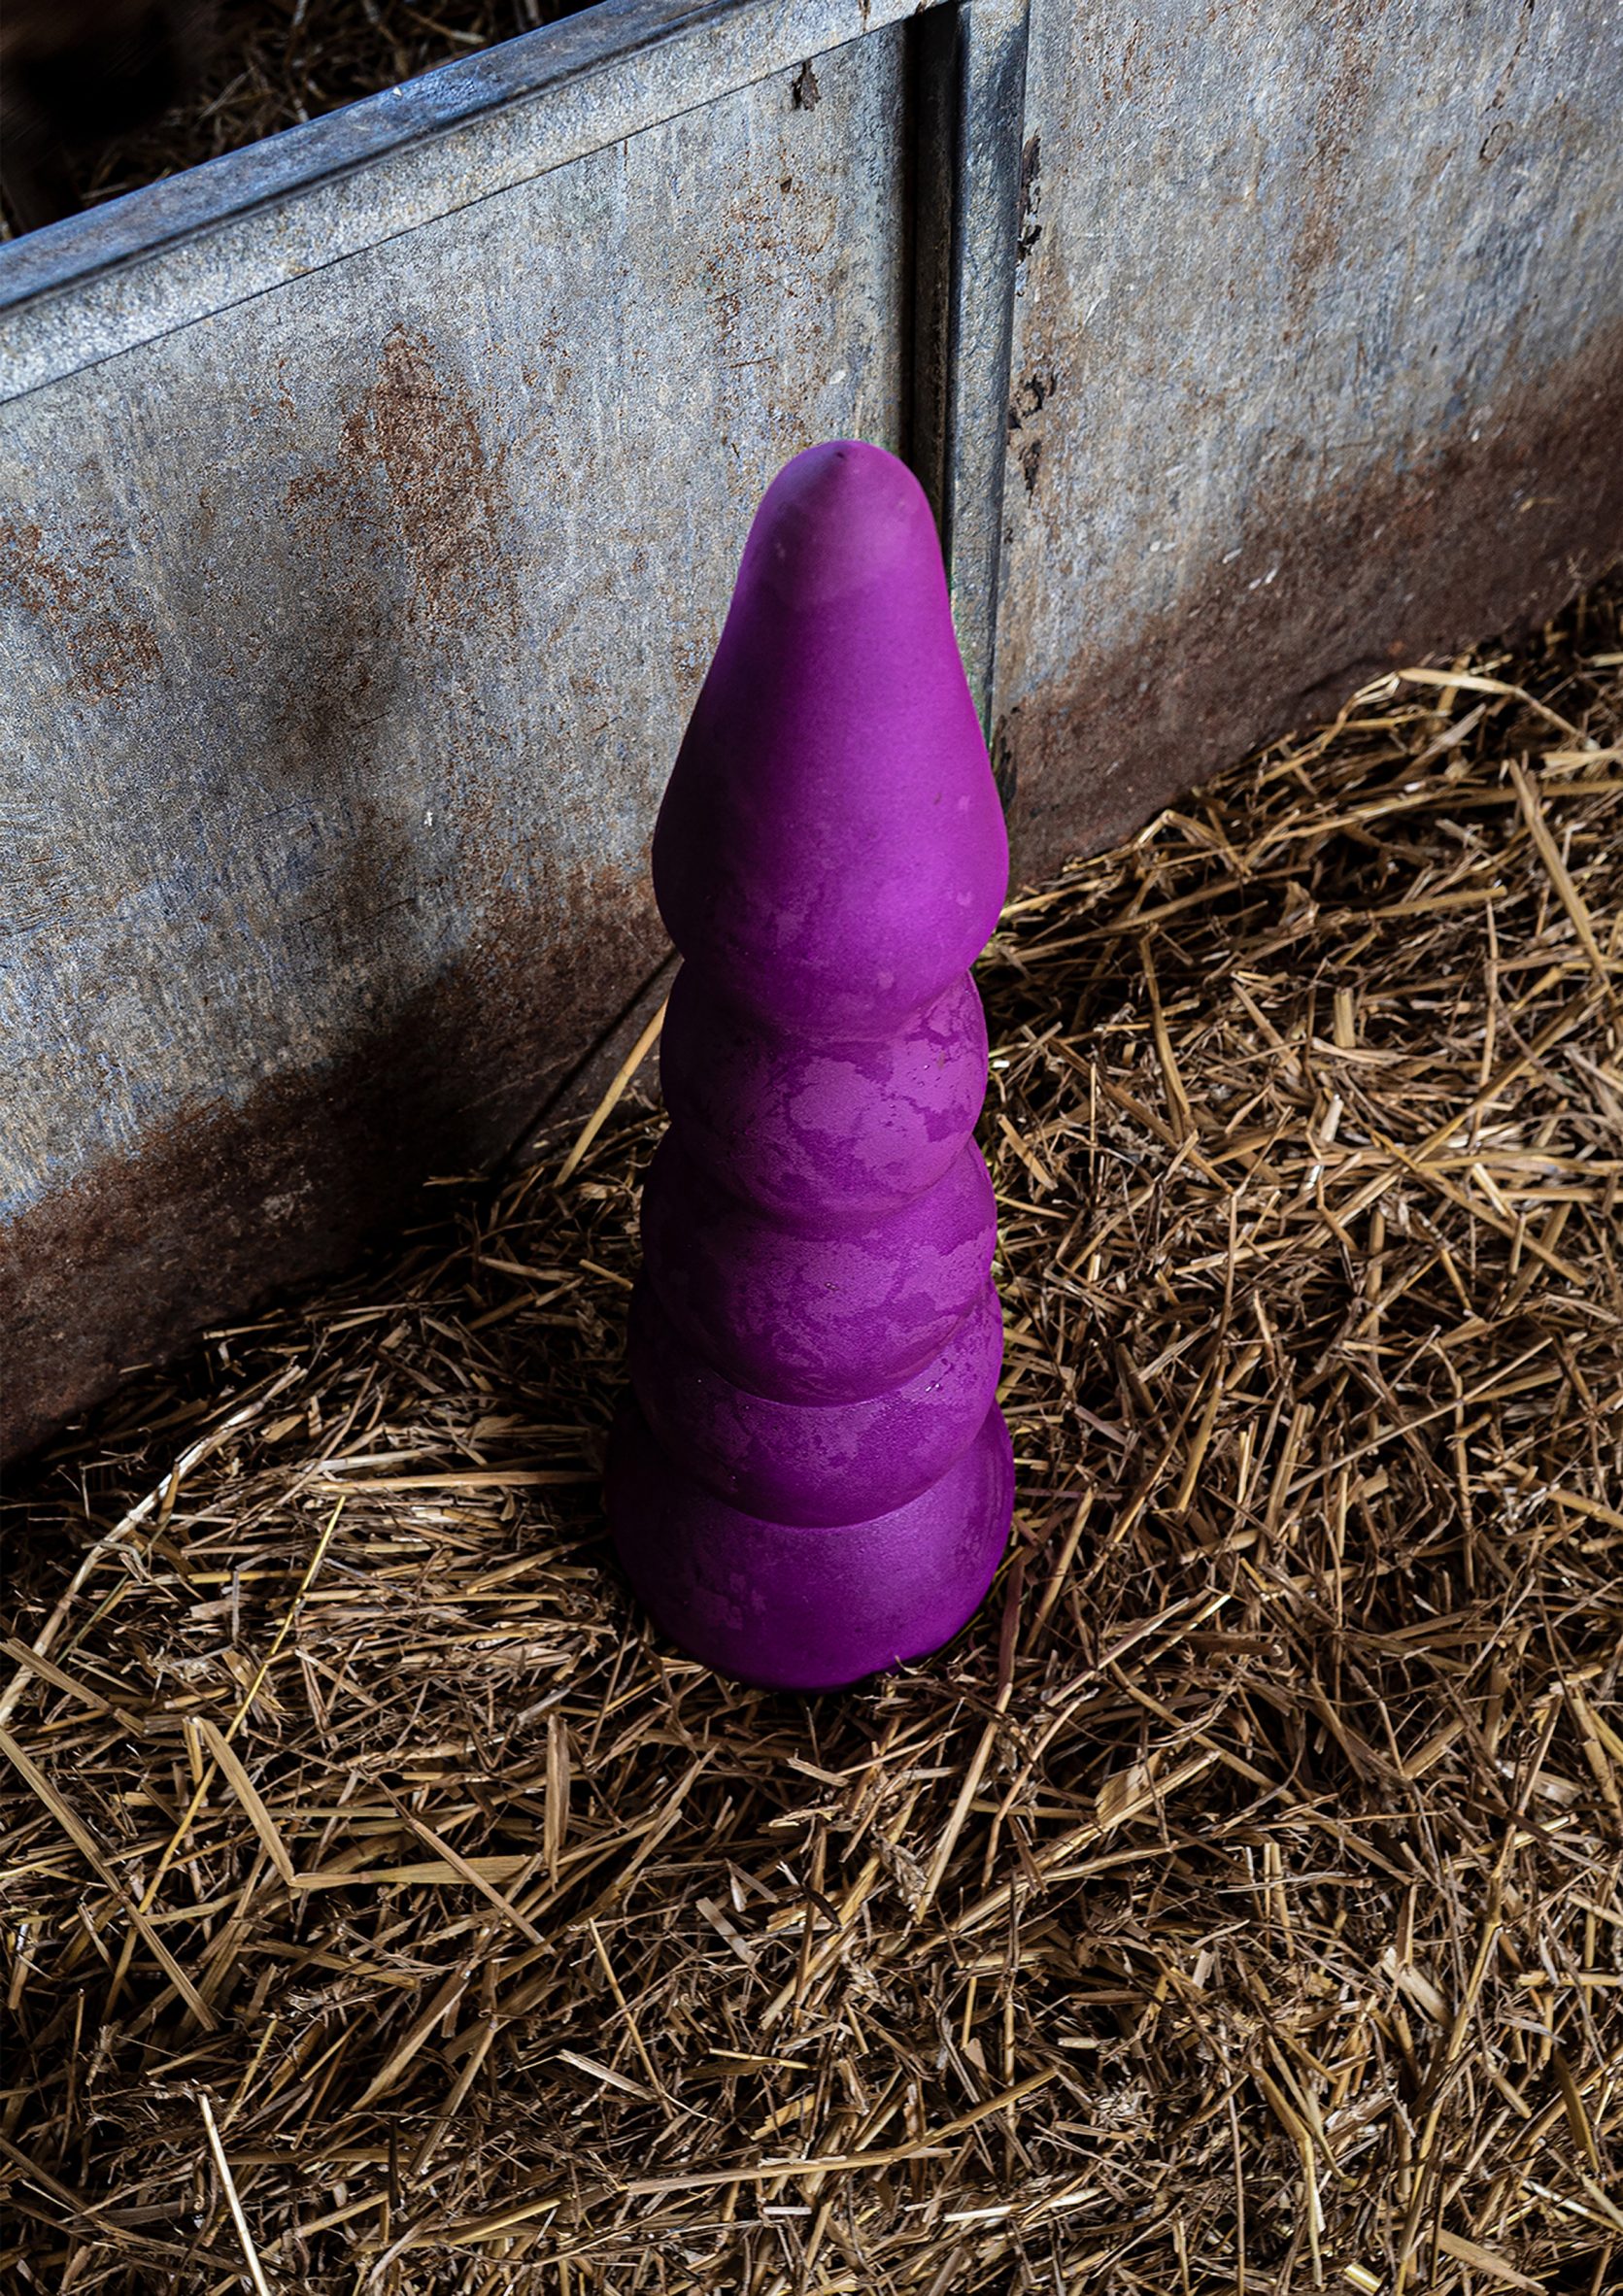 Purple dildo for cows by Ece Tan from Central Saint Martins